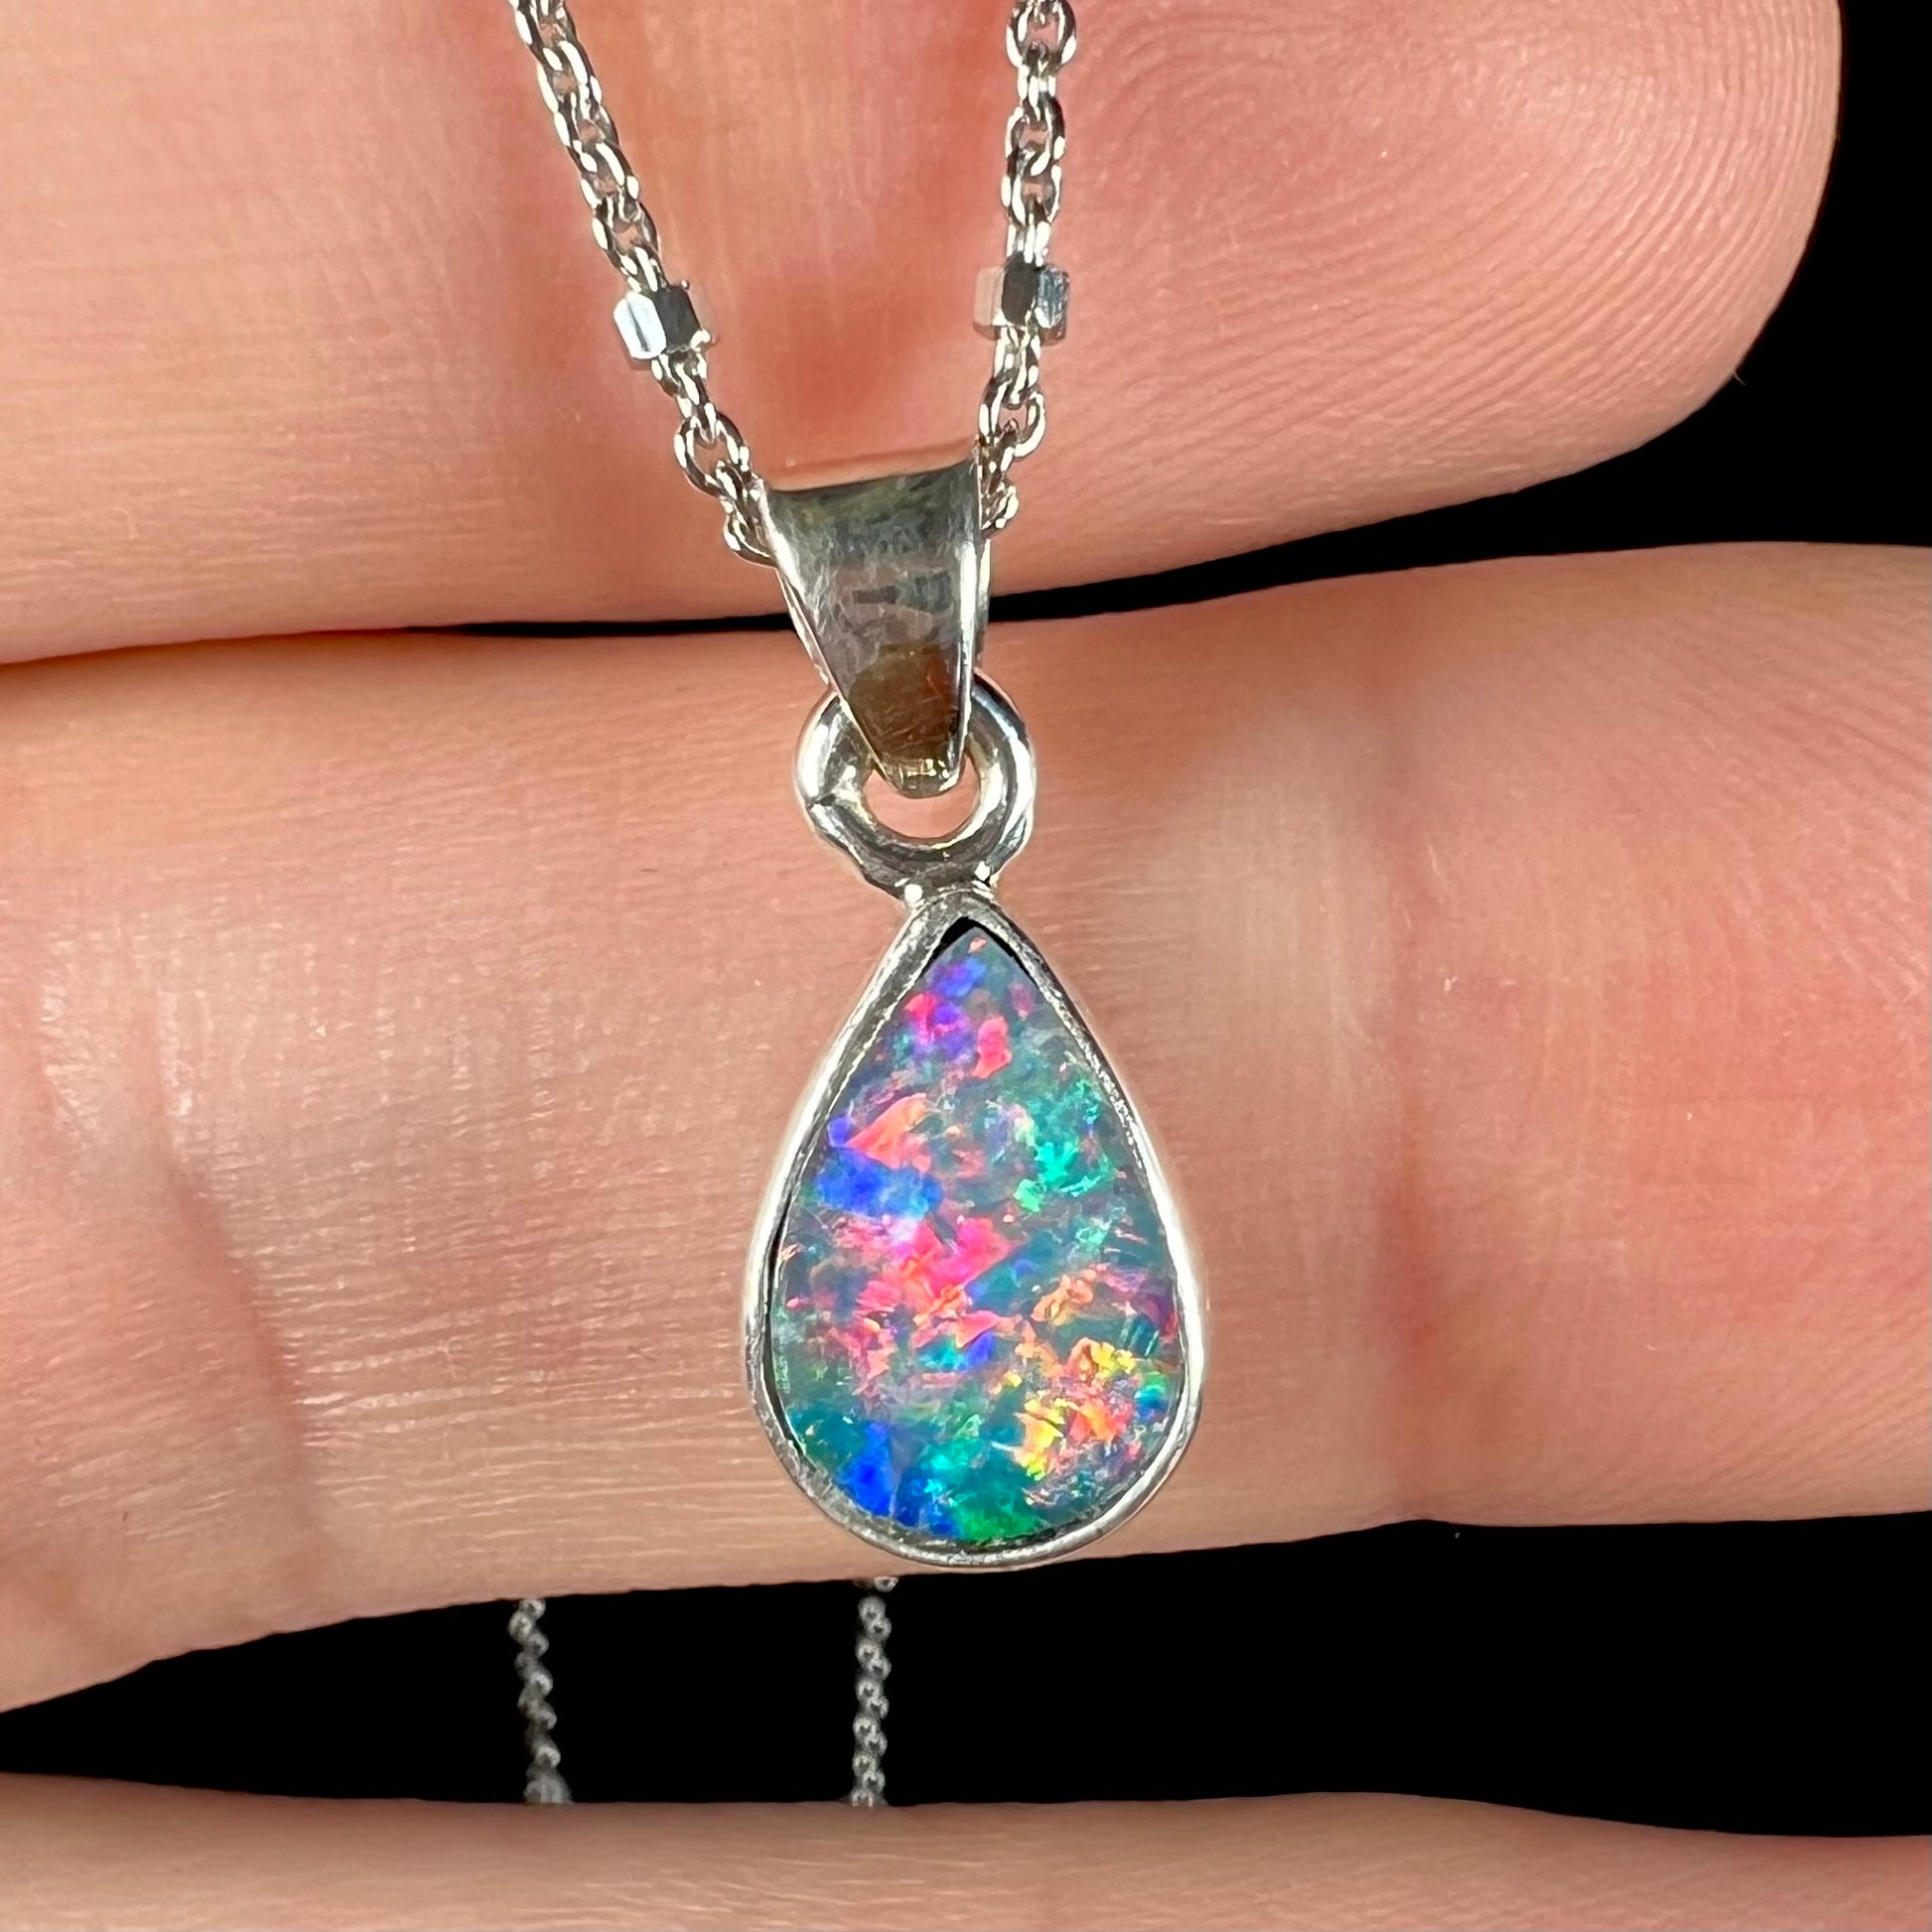 A pear shaped black opal necklace set in sterling silver.  The opal vividly flashes every color of the rainbow.